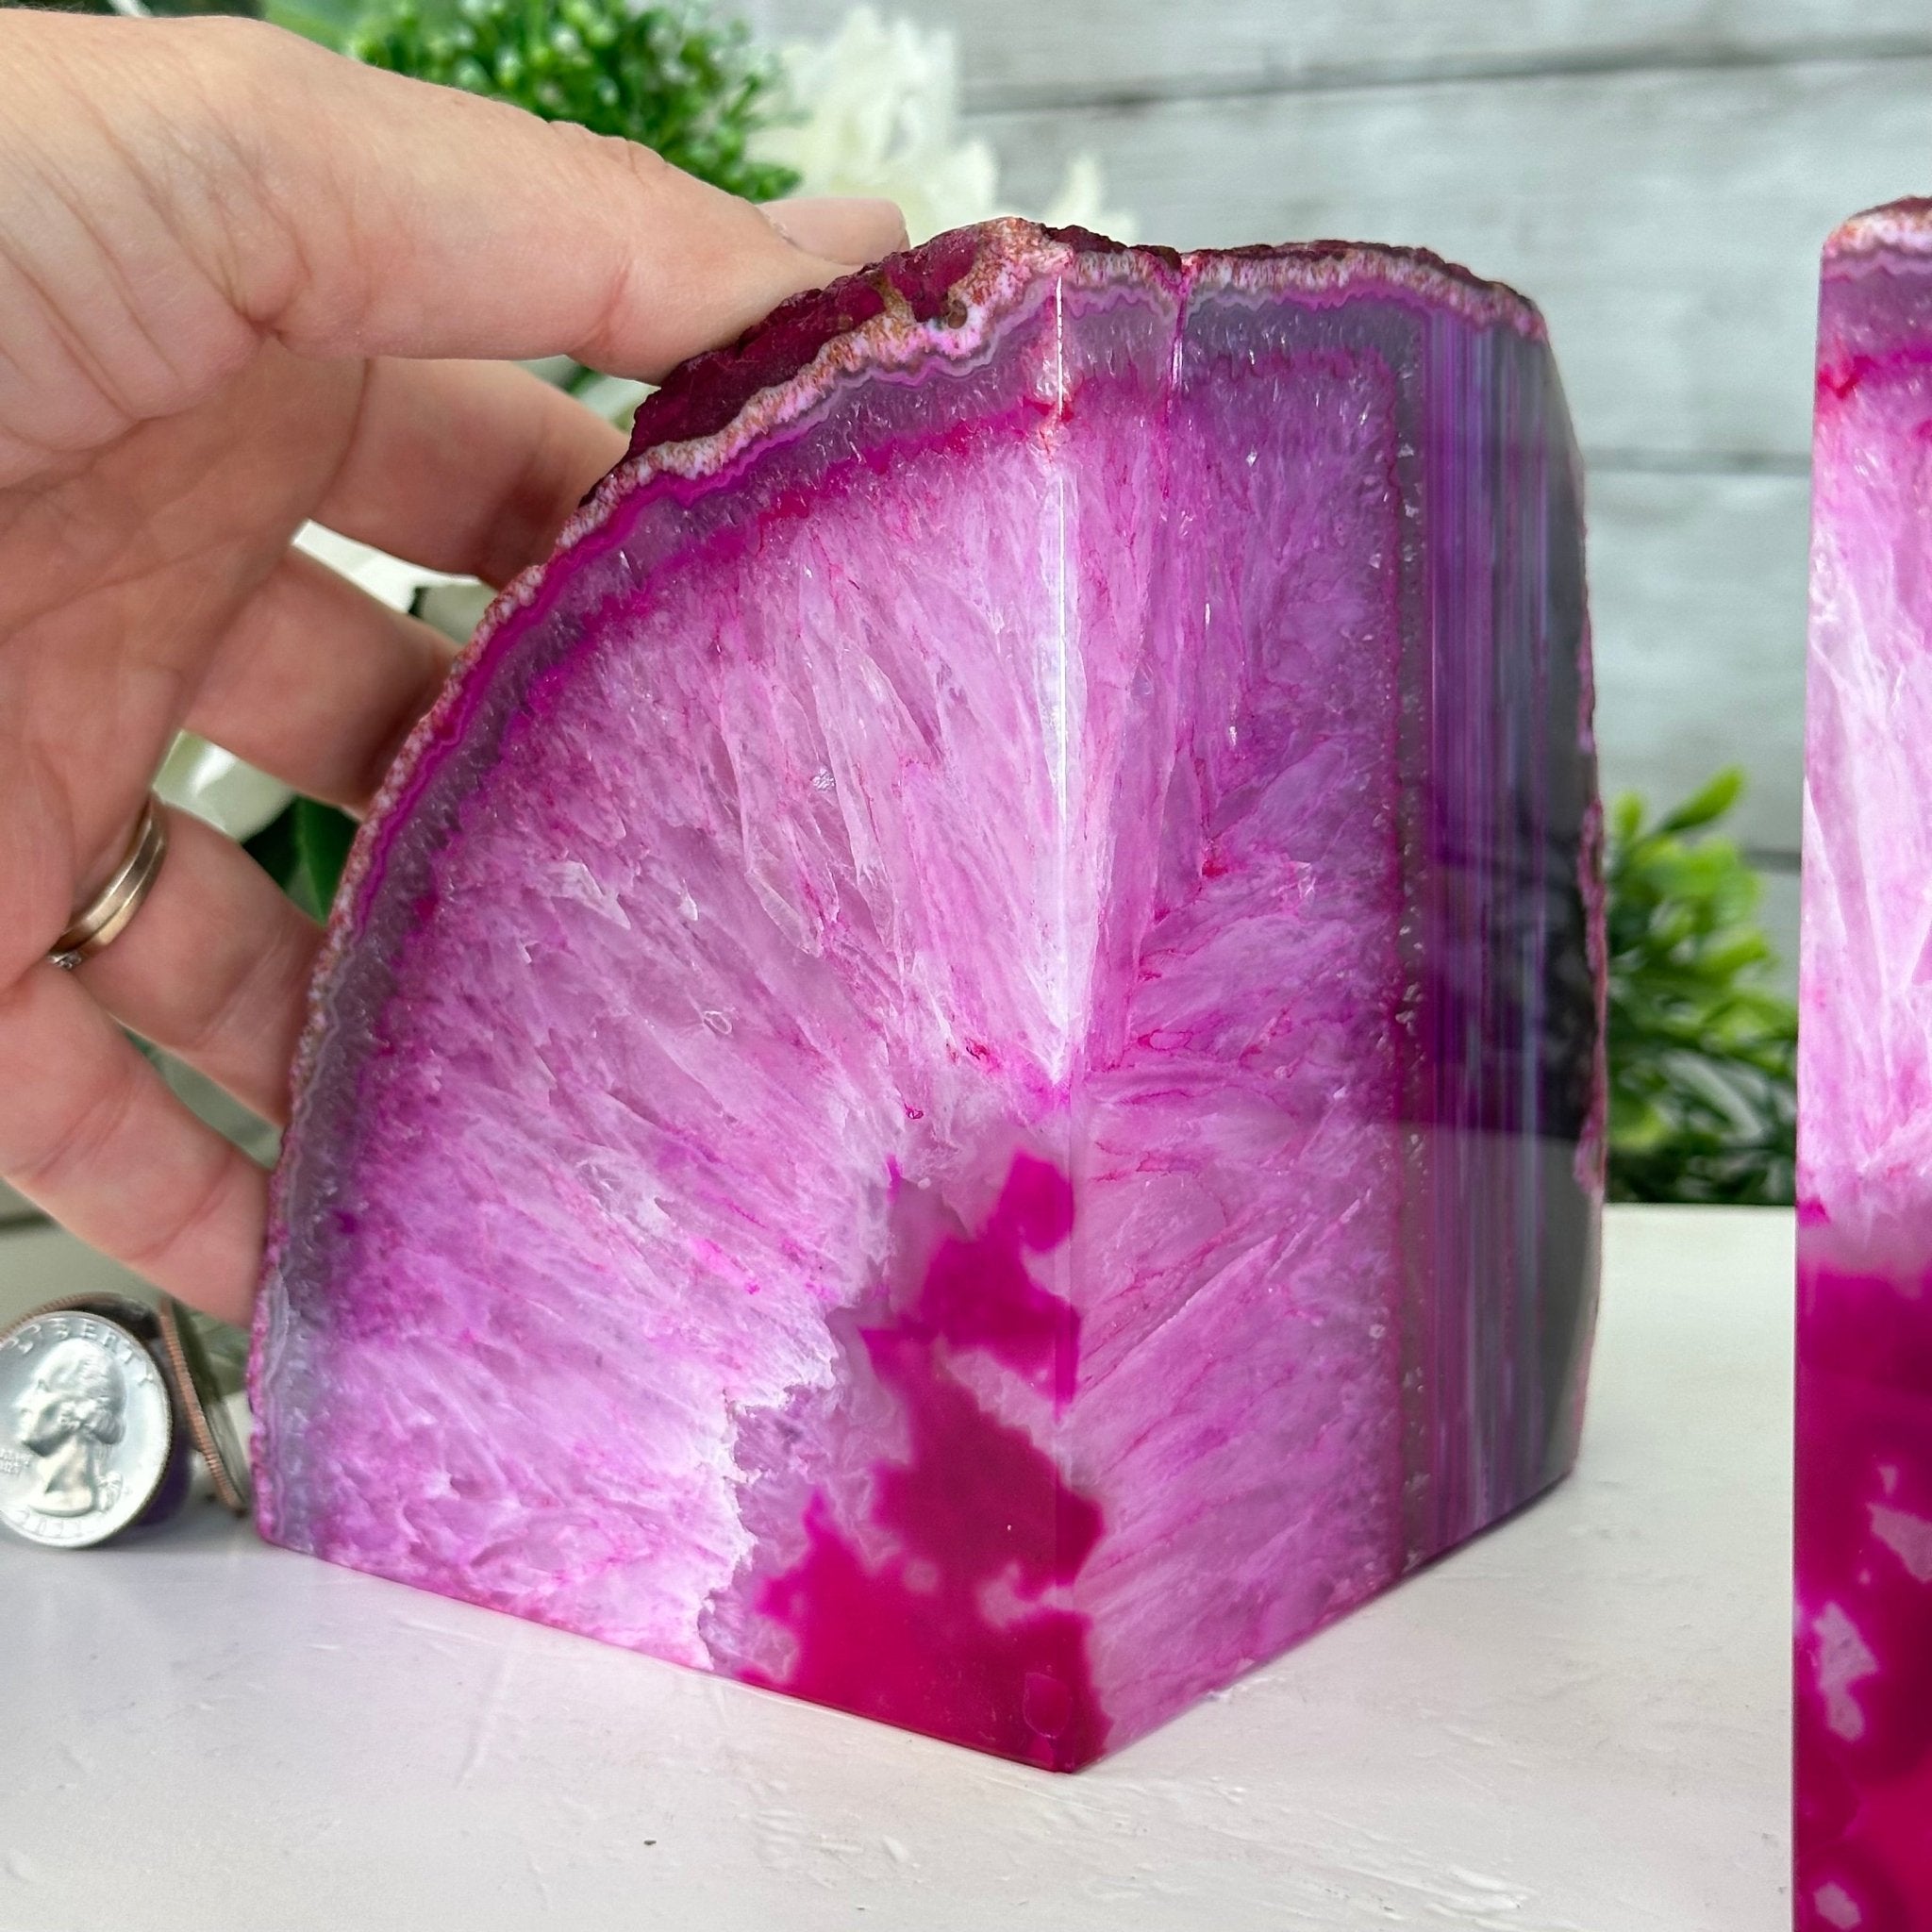 Pink Dyed Brazilian Agate Stone Bookends, 10.9 lbs & 5" tall #5151PA-027 - Brazil GemsBrazil GemsPink Dyed Brazilian Agate Stone Bookends, 10.9 lbs & 5" tall #5151PA-027Bookends5151PA-027